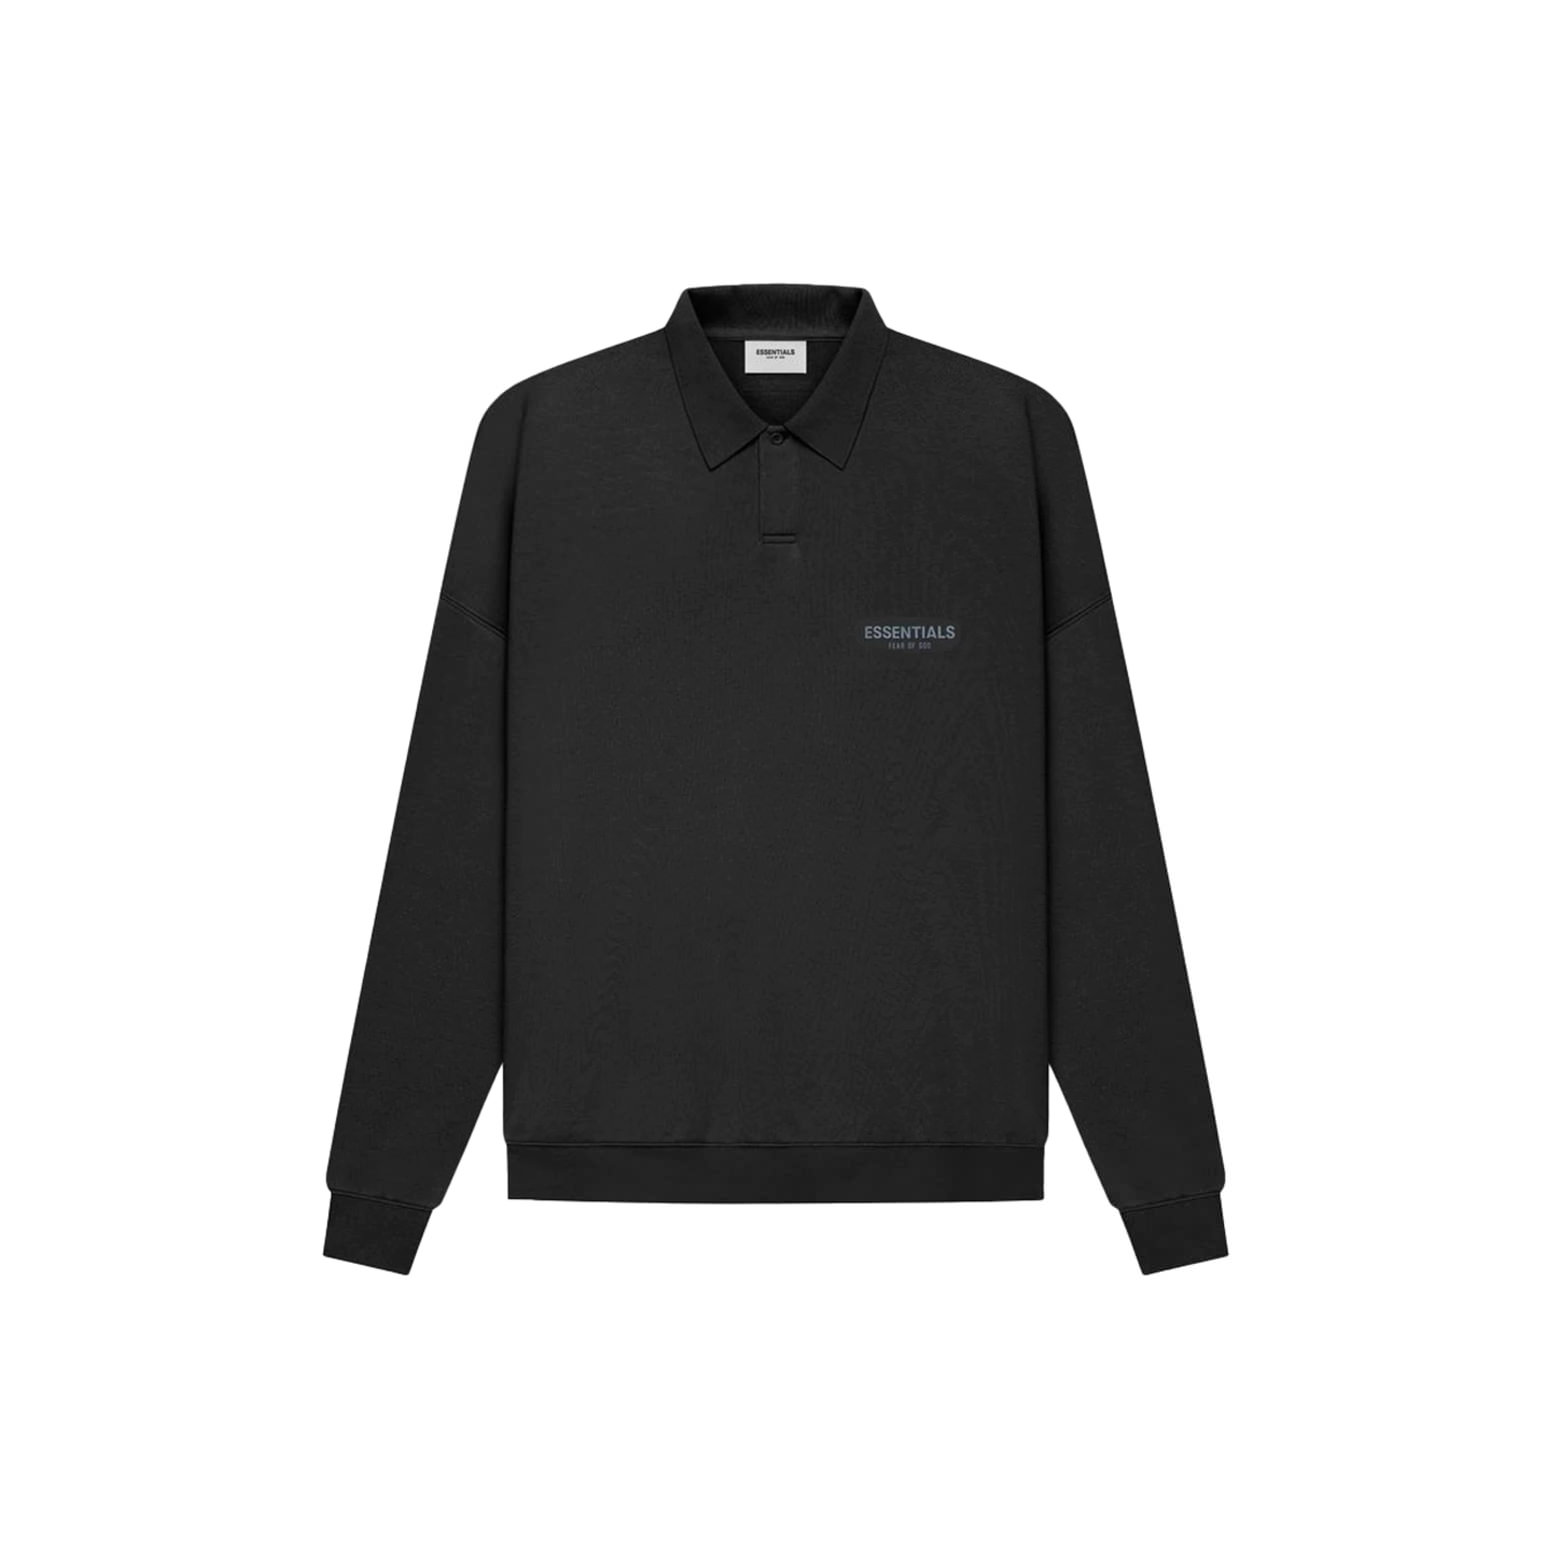 FEAR OF GOD ESSENTIALS Long Sleeve French Terry Polo BlackFEAR OF